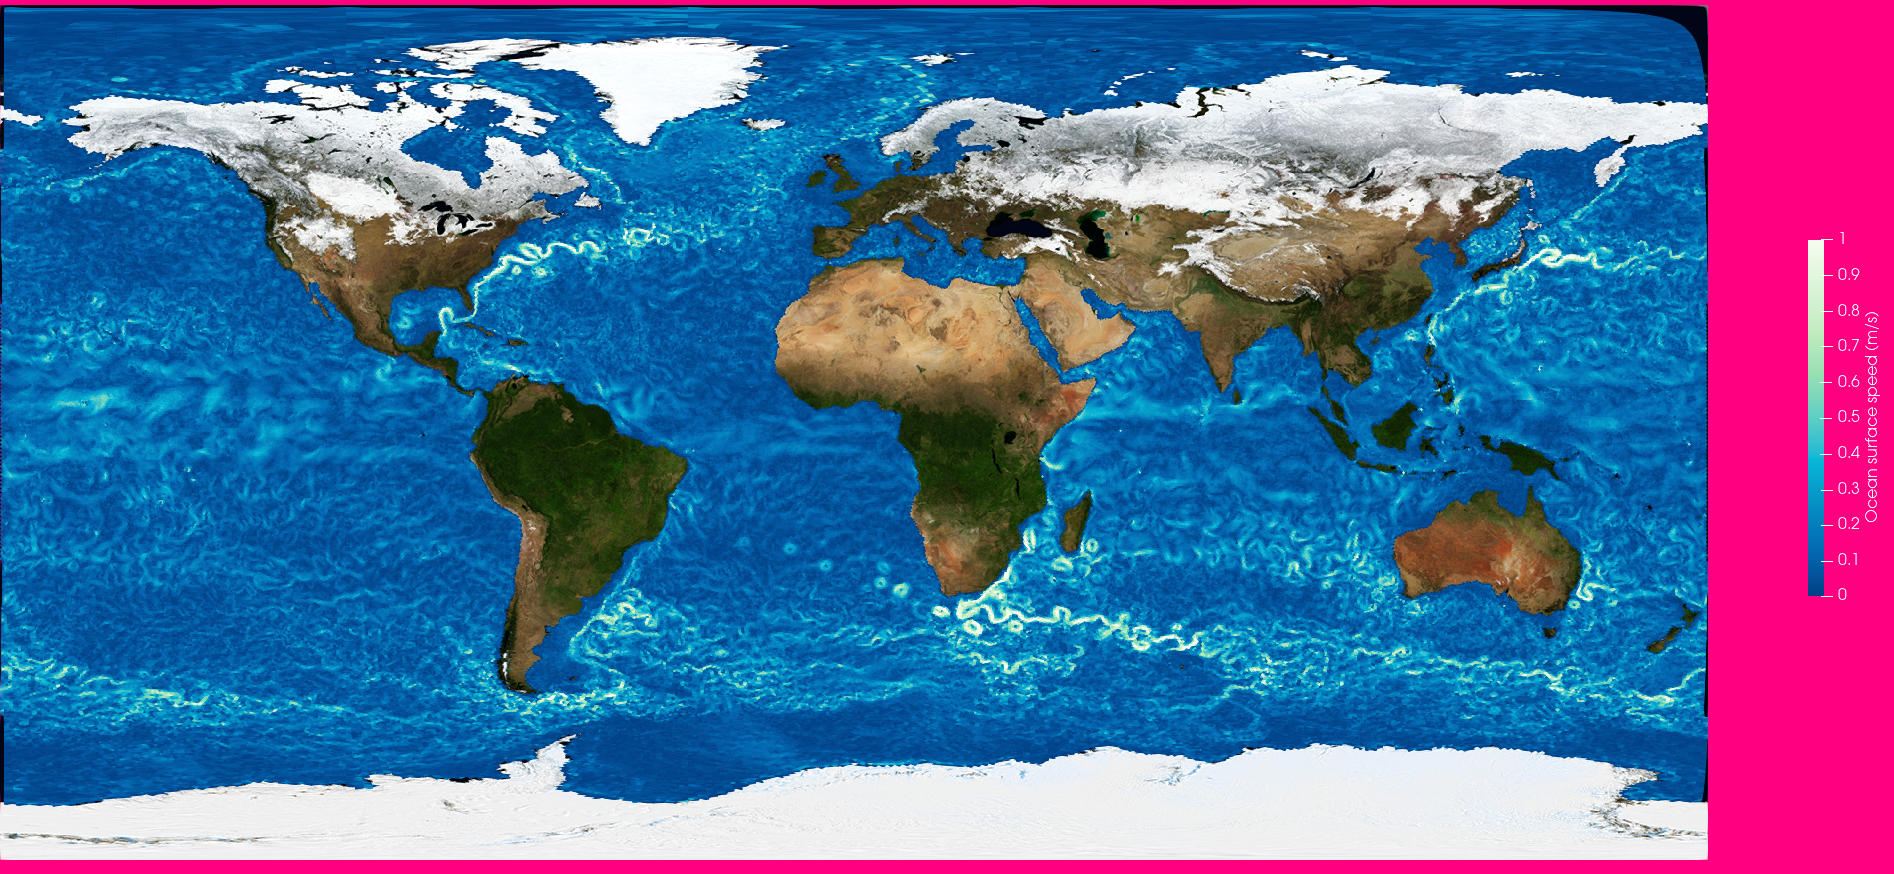 ../../../../../../_images/2d-ocean-with-earth-and-adjustments.png